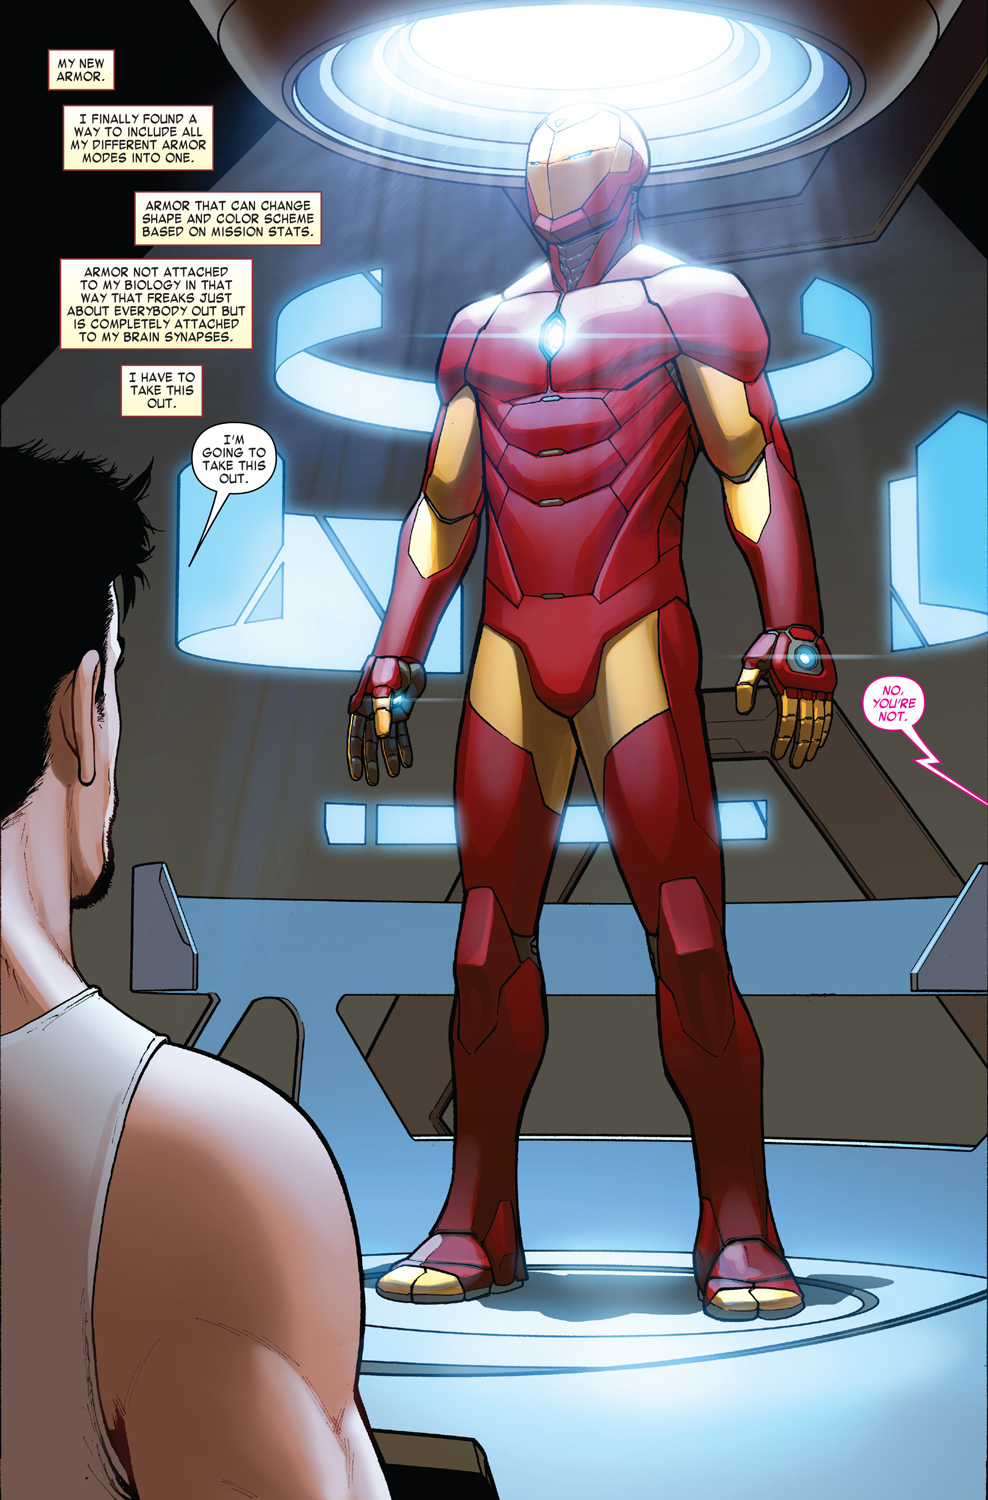 Take A Look At Iron Man’s New Armour